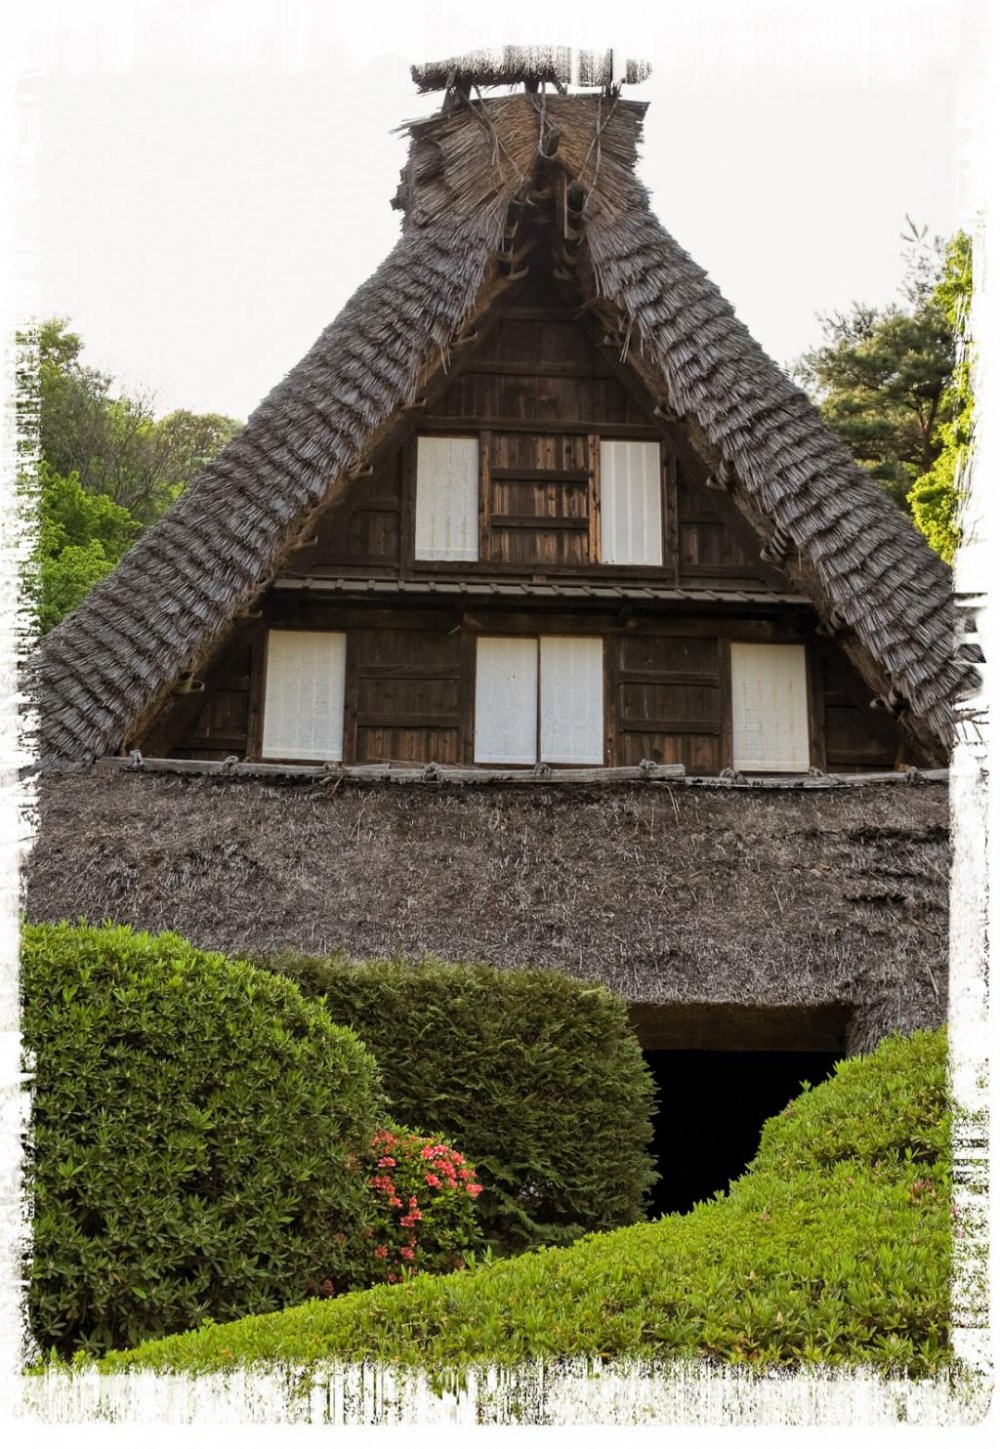 Emukai house from Toyama Prefecture (late 17th century).